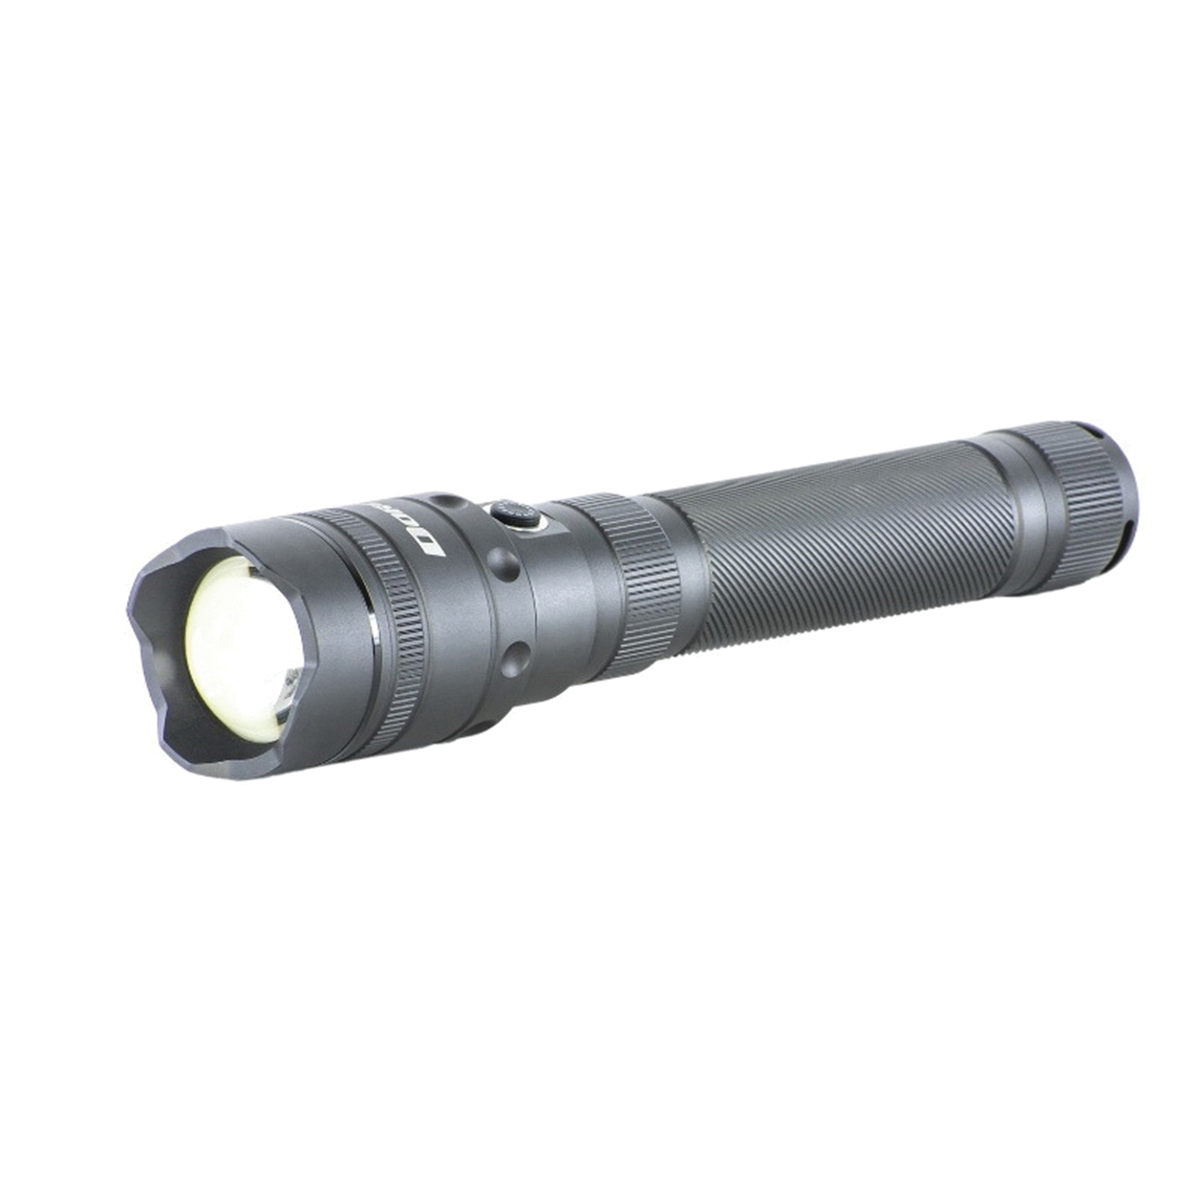 Buy Dorcy Pro Series 41-2611 Flashlight and Power Bank, 5000 mAh,  Lithium-Ion, Rechargeable Battery, LED Lamp, hr Run Time Black